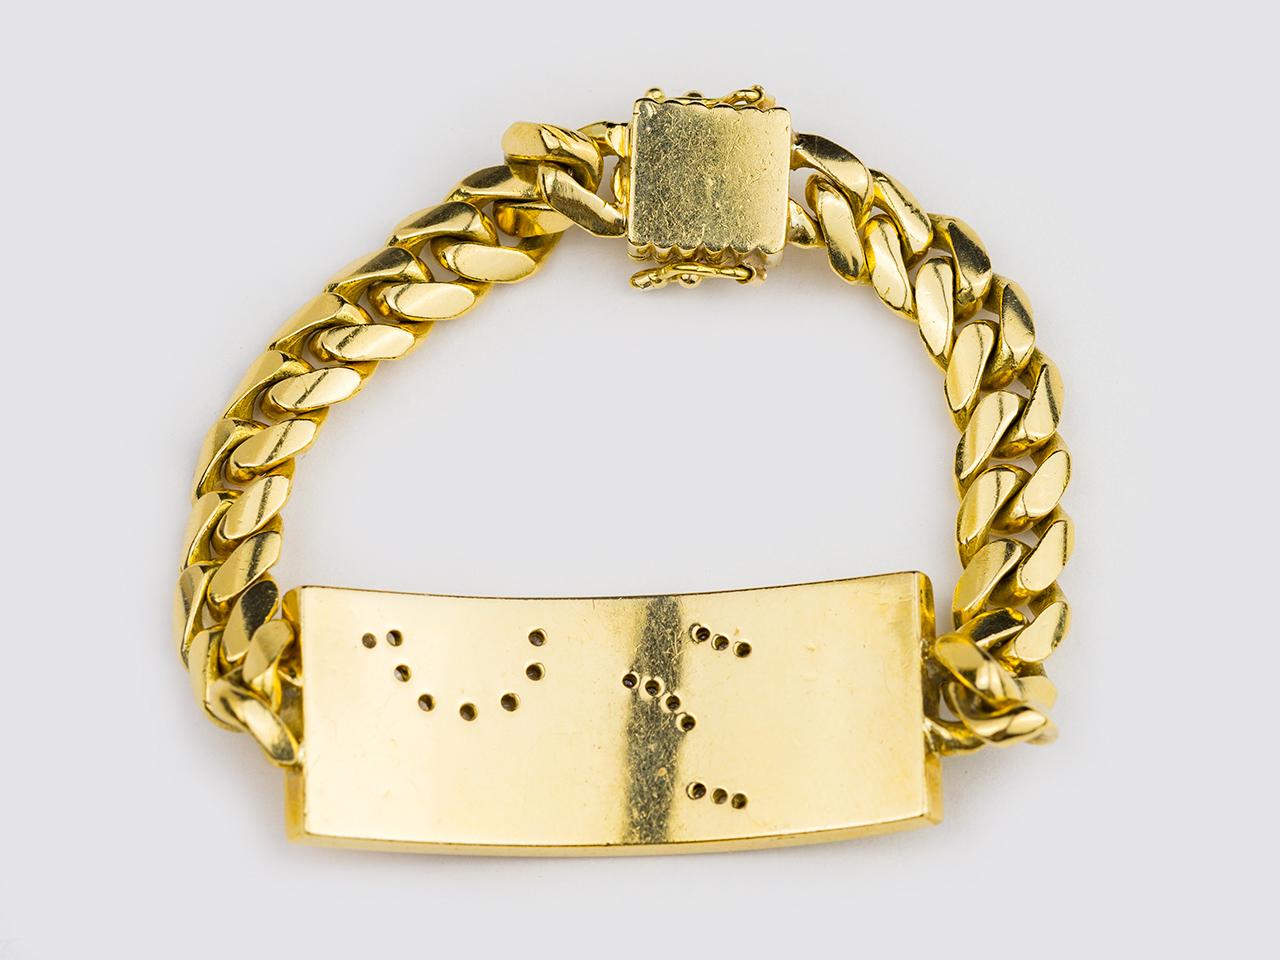 18kt gold I.D. Brace set with various hardstopnes in a flora and fauna motif.